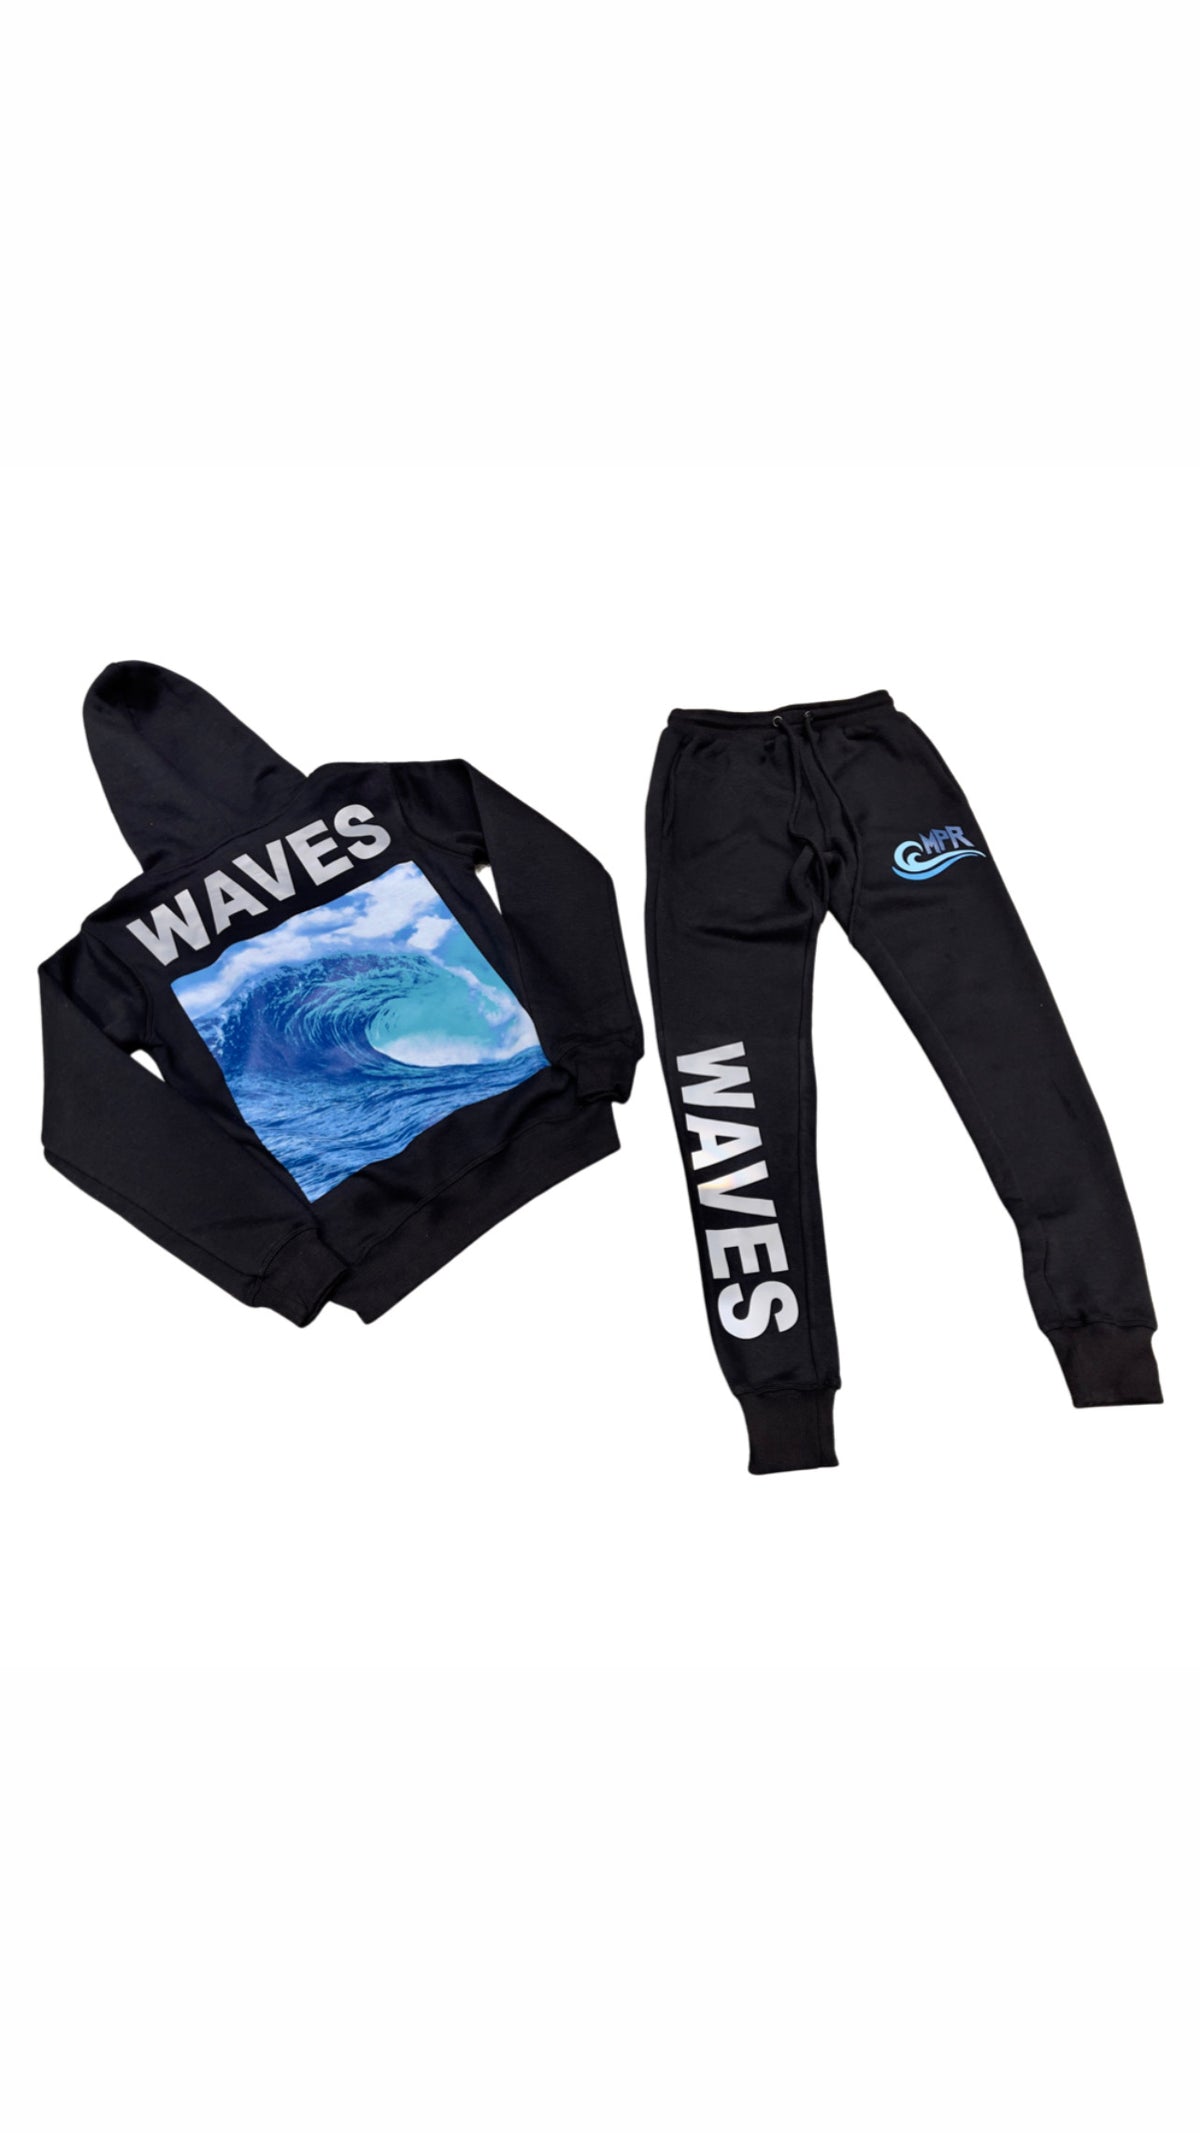 MPR CLOTHING  BLACK 3M Ride THE WAVE Sweatsuit